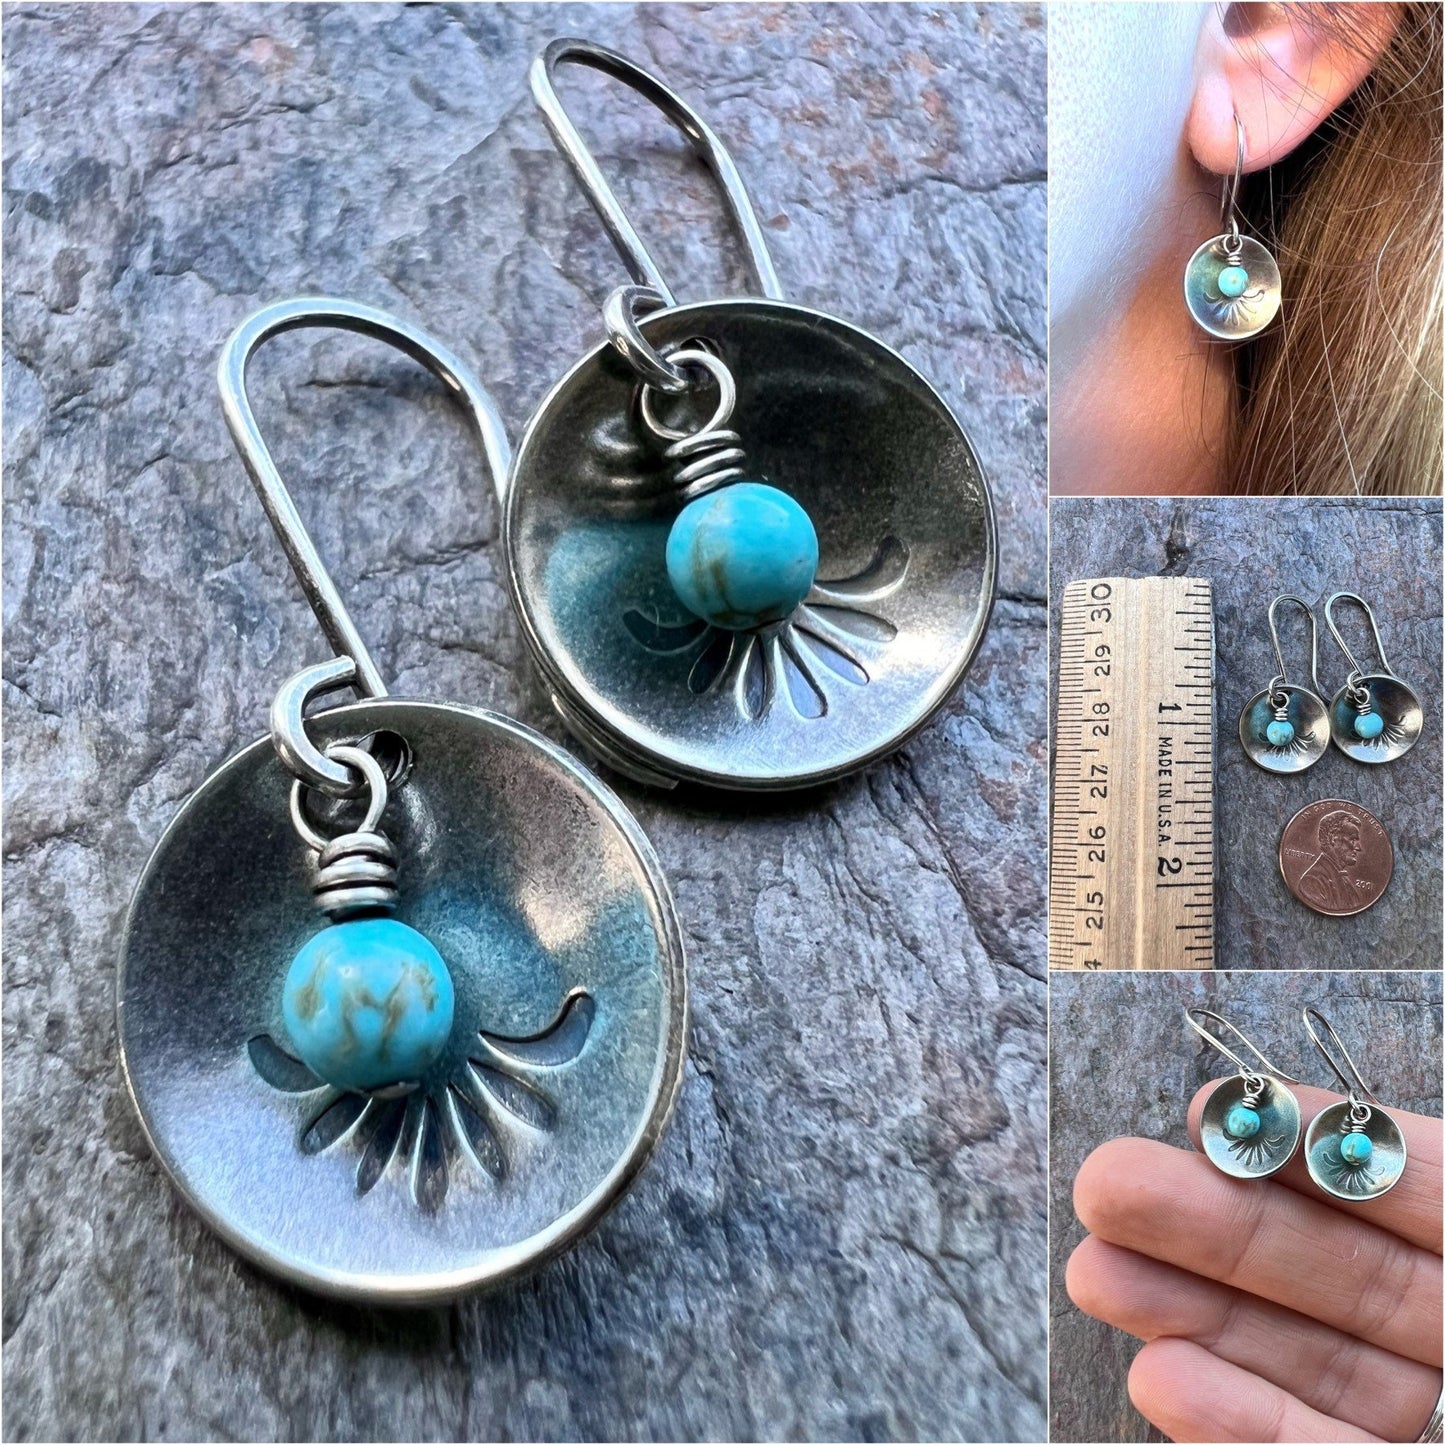 Turquoise Sterling Silver Earrings - Tiny Turquoise Beads in Stamped Sterling Silver Domed Circles